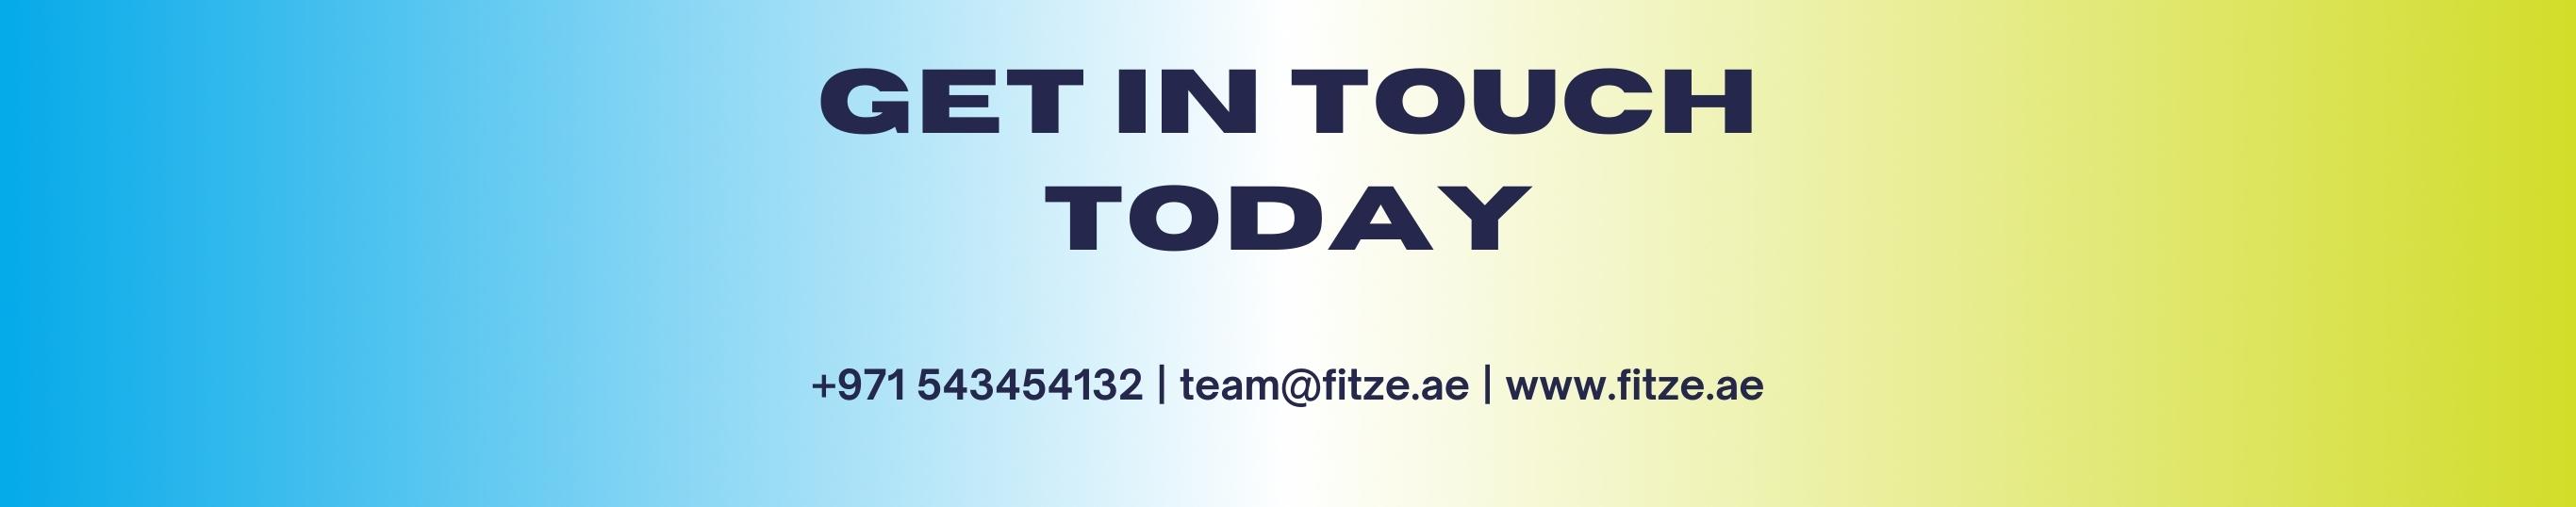 Get in touch today. Dubai Fitness Challenge Dubai 30x30 with Fitze